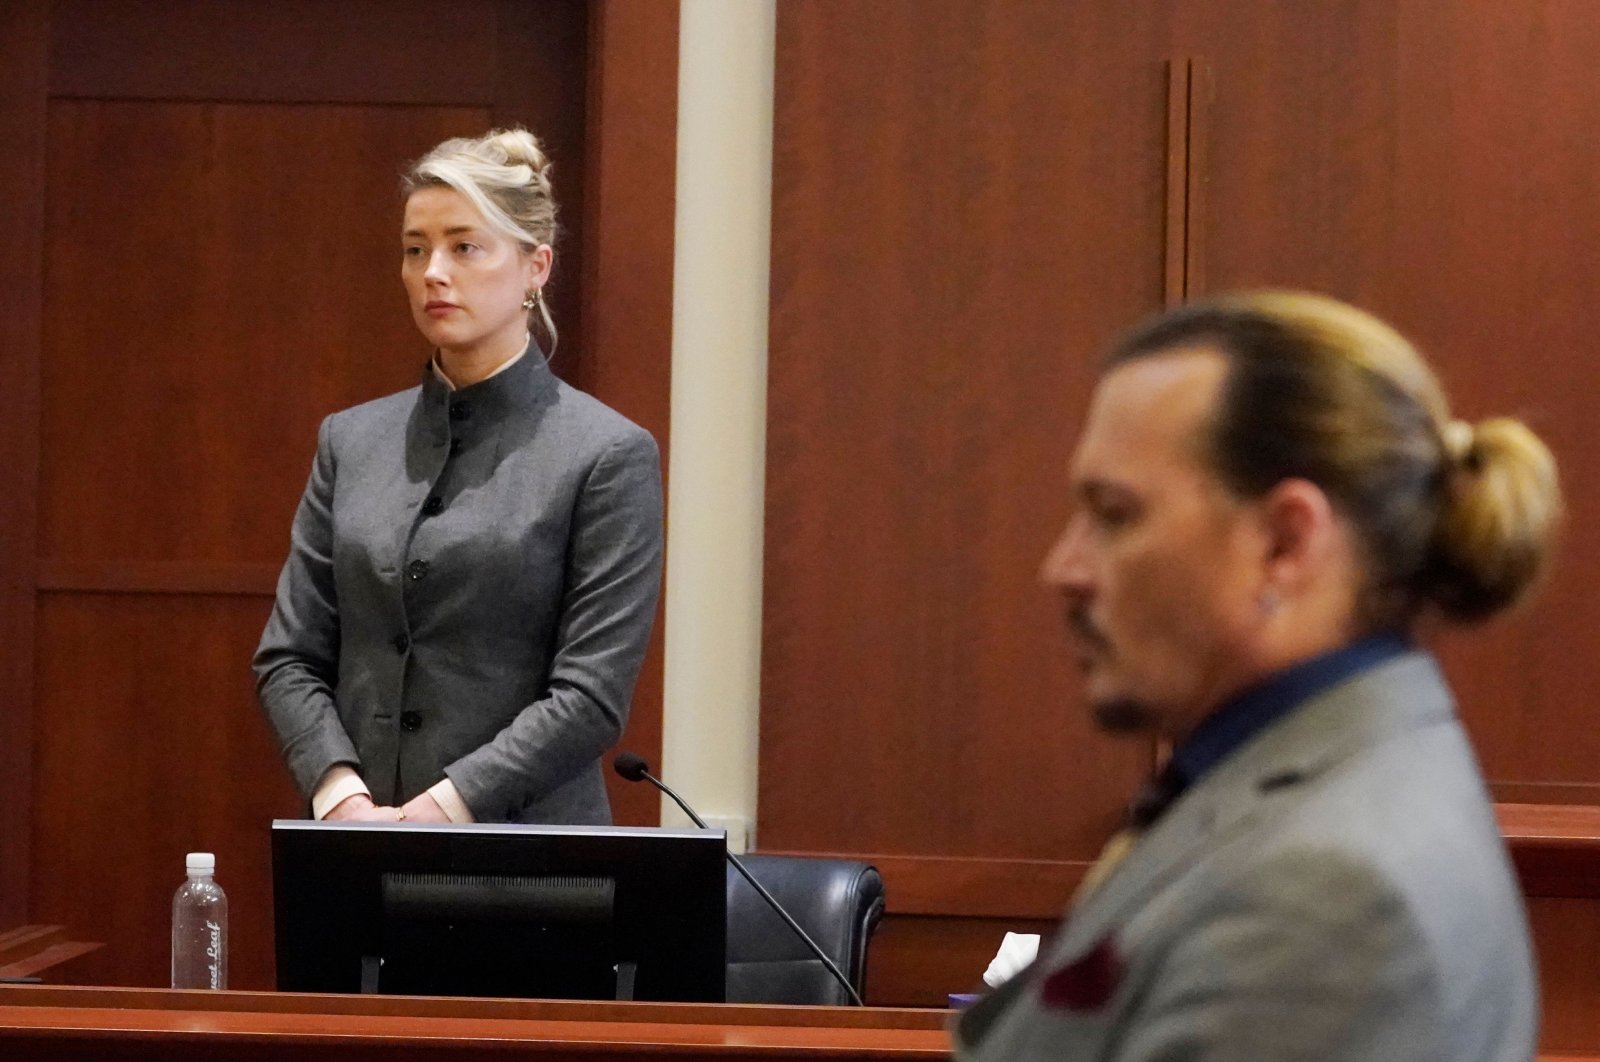 U.S. actors Amber Heard (L) and Johnny Depp watch as the jury leaves the courtroom at the end of the day at the Fairfax County Circuit Courthouse in Fairfax, Virginia, U.S., May 16, 2022. (AFP Photo)